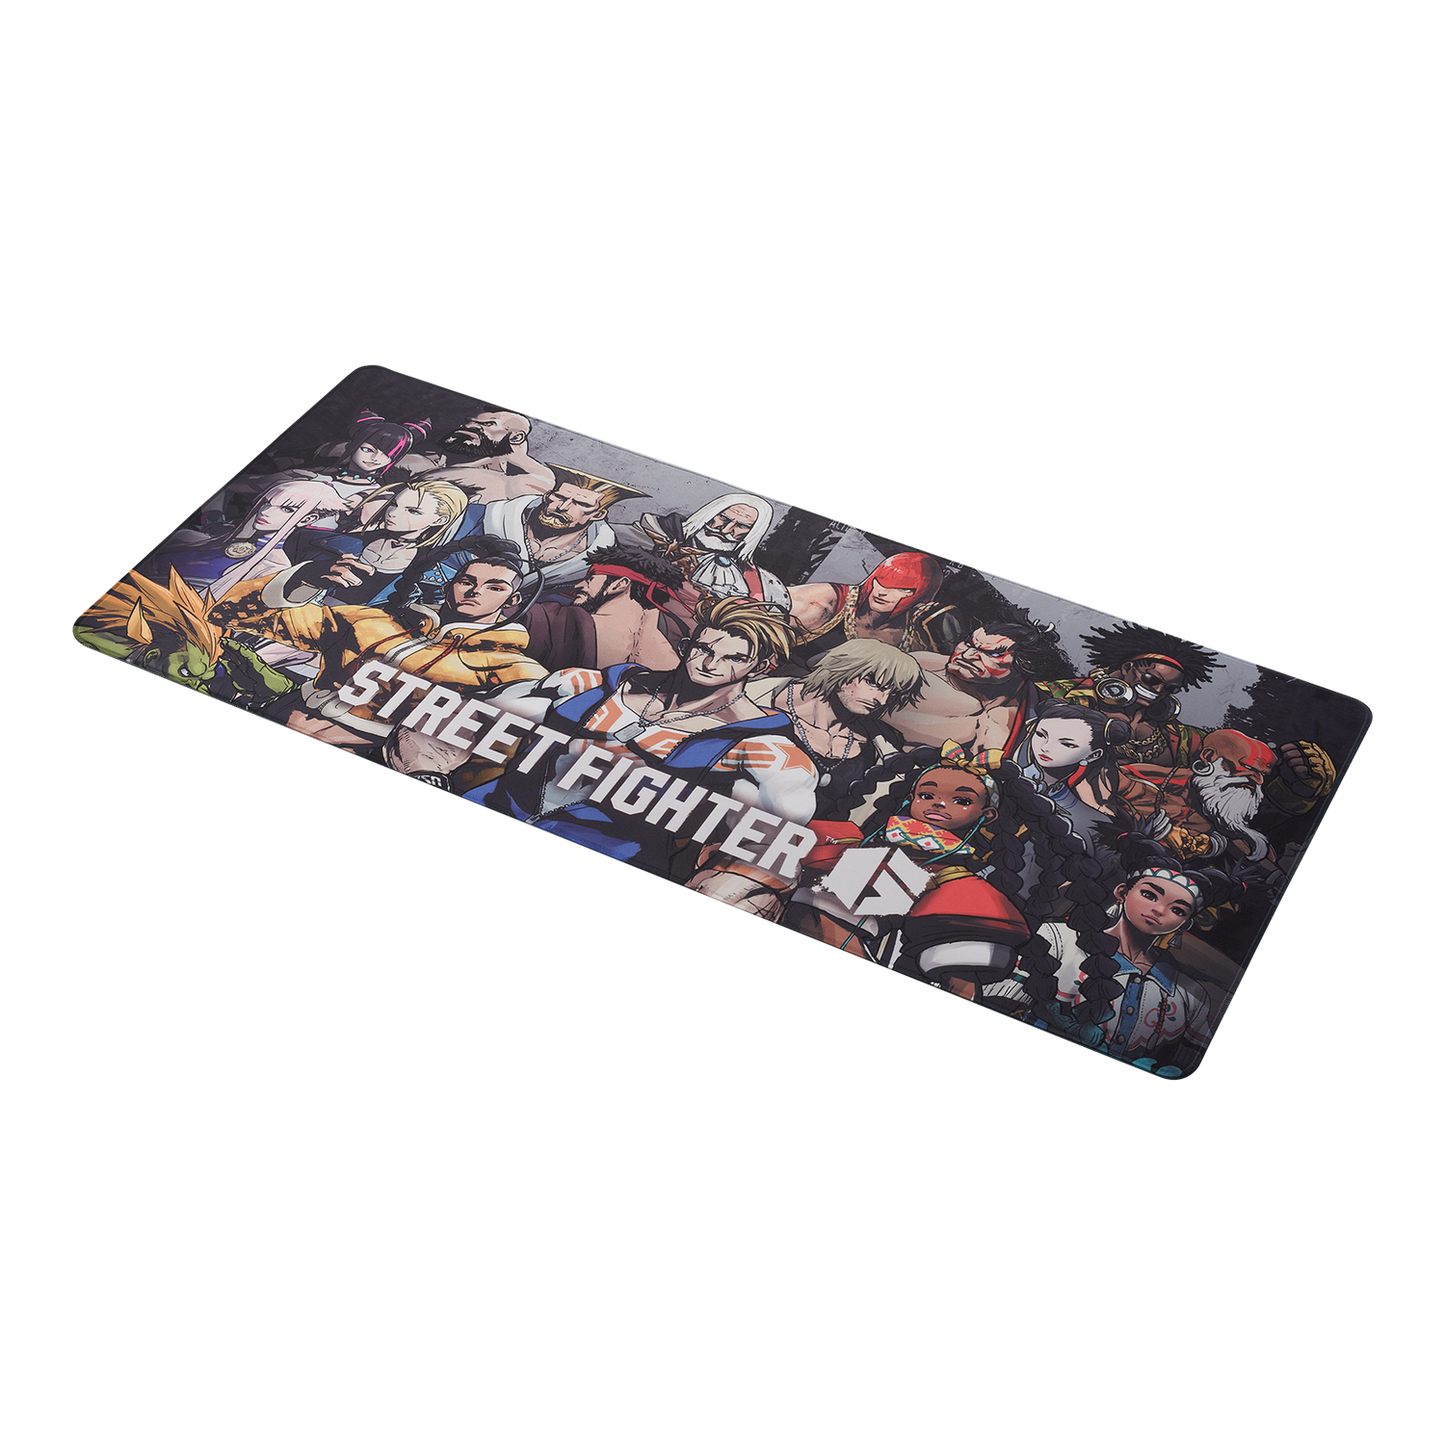 Cooler Master Mousepad MP511/Speed/Street Fighter - XL Size